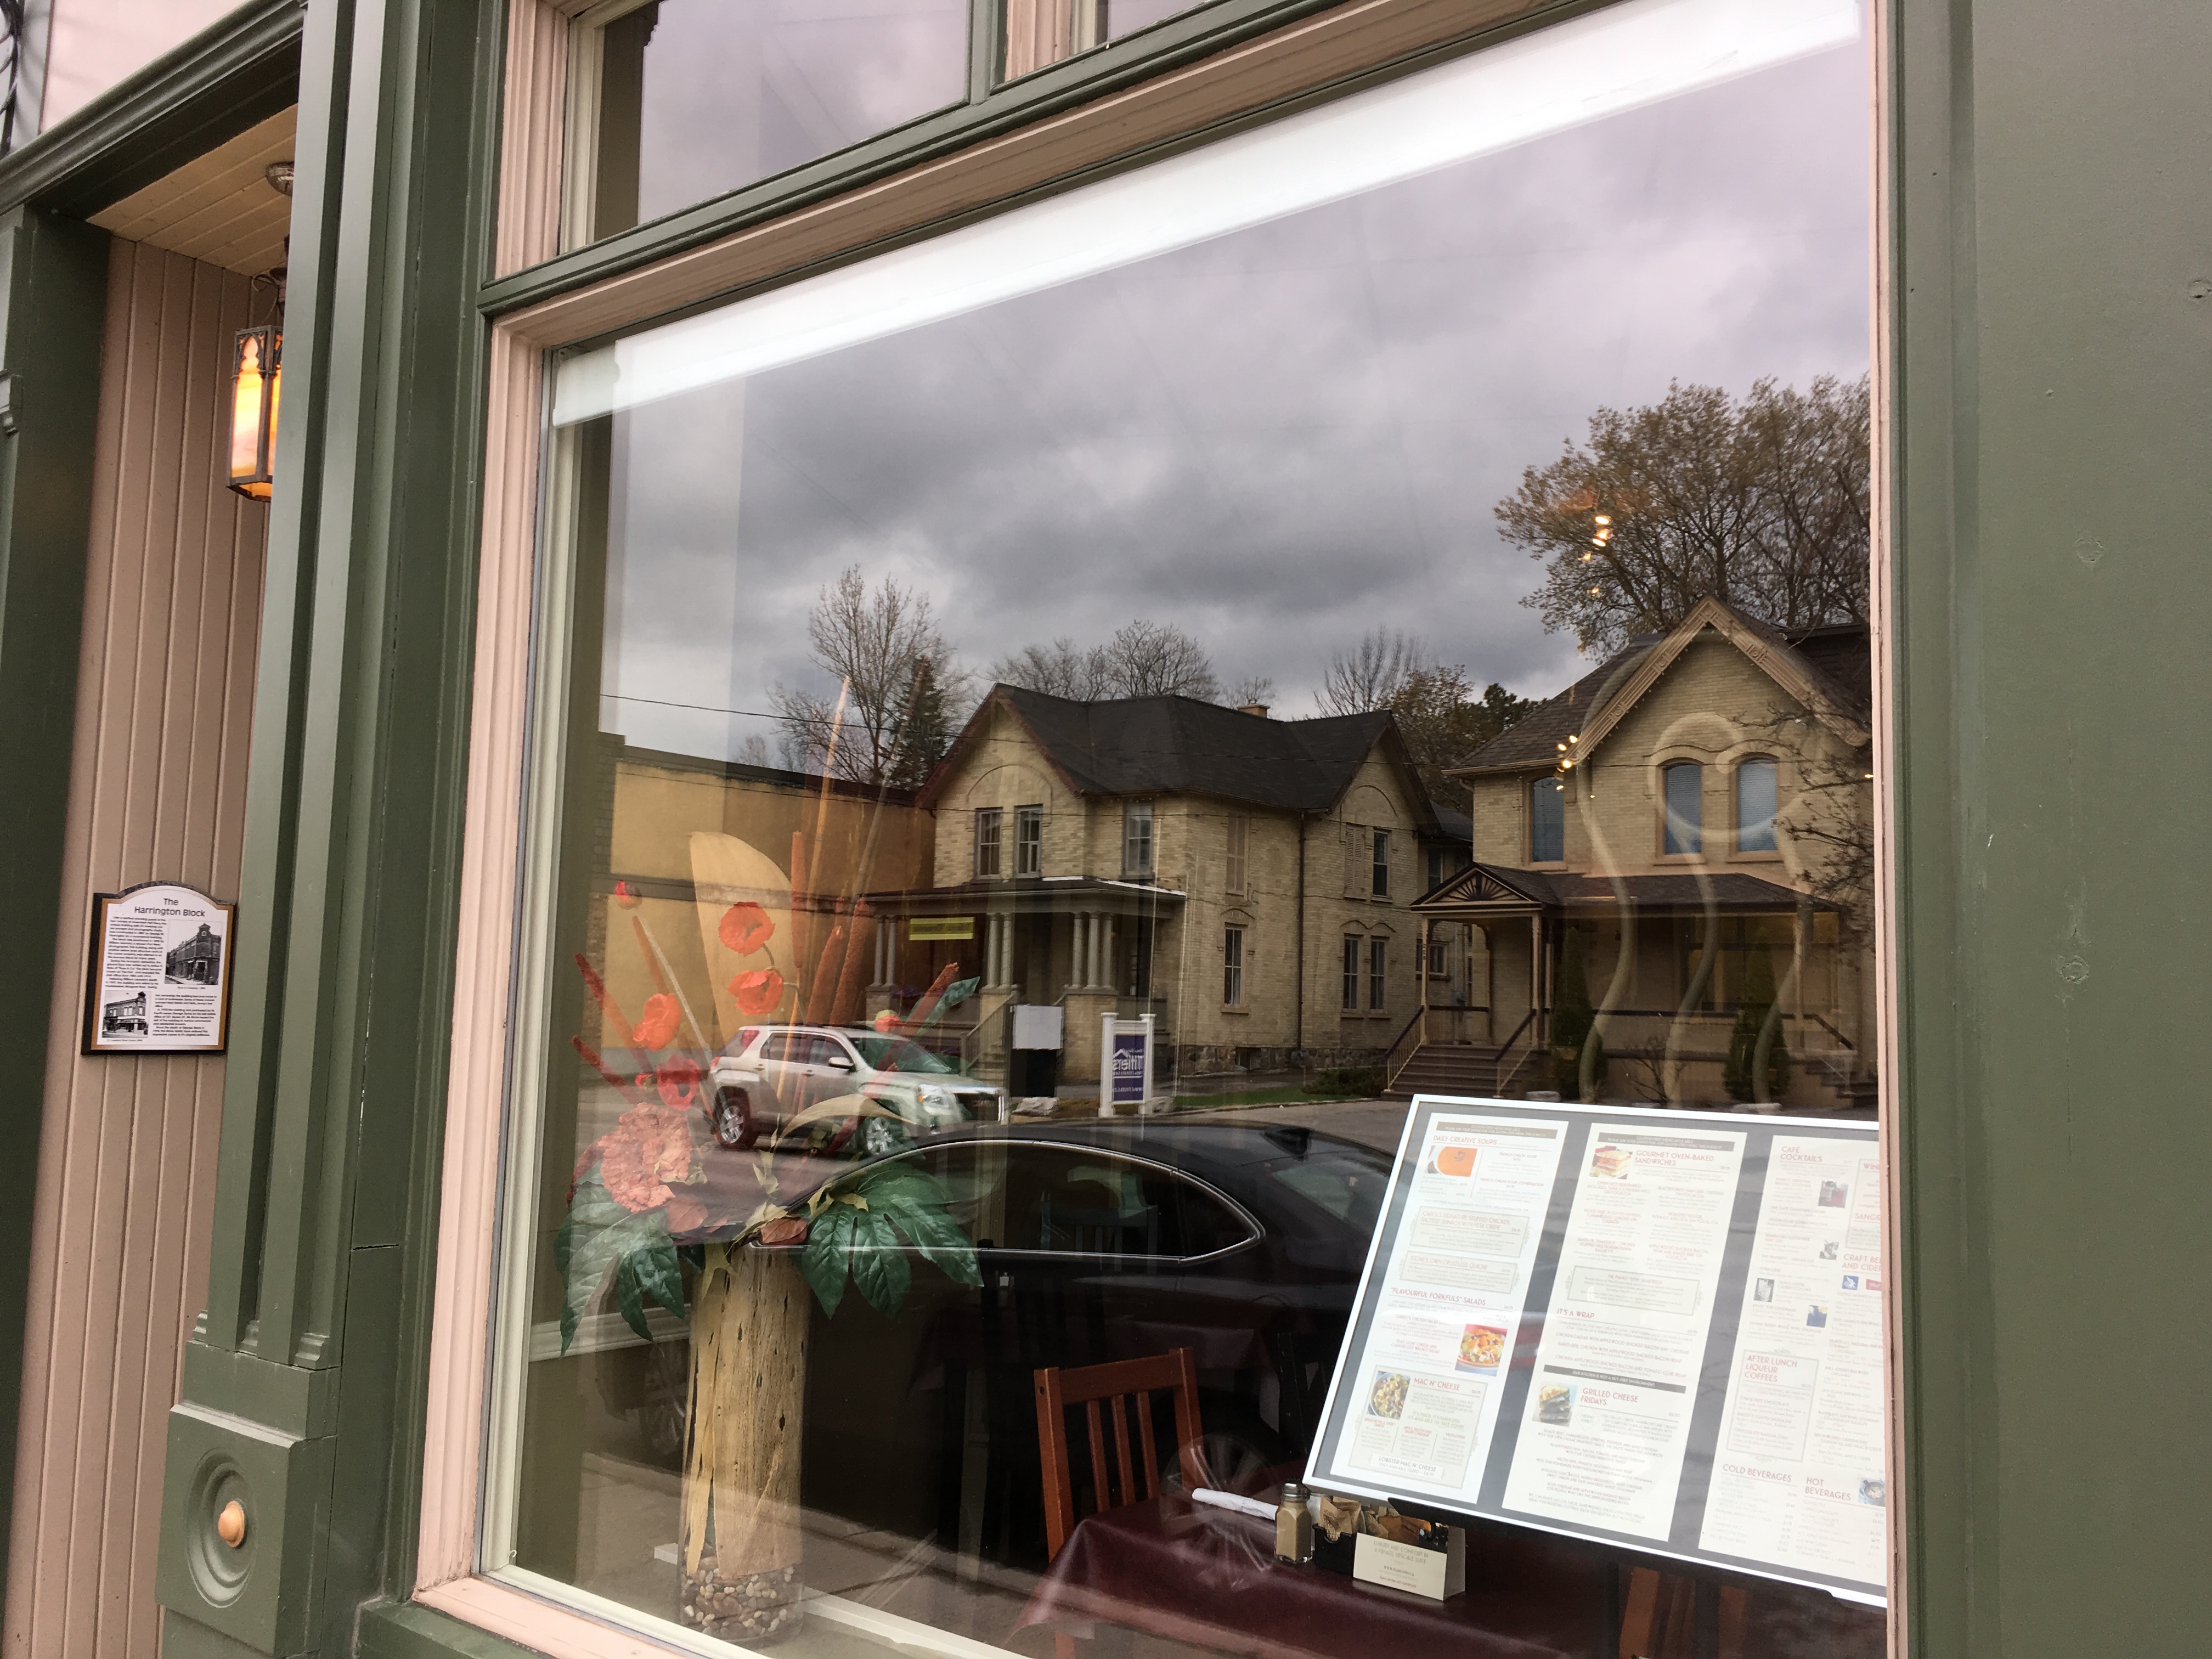 Piano cafe menu through clean windows in port perry